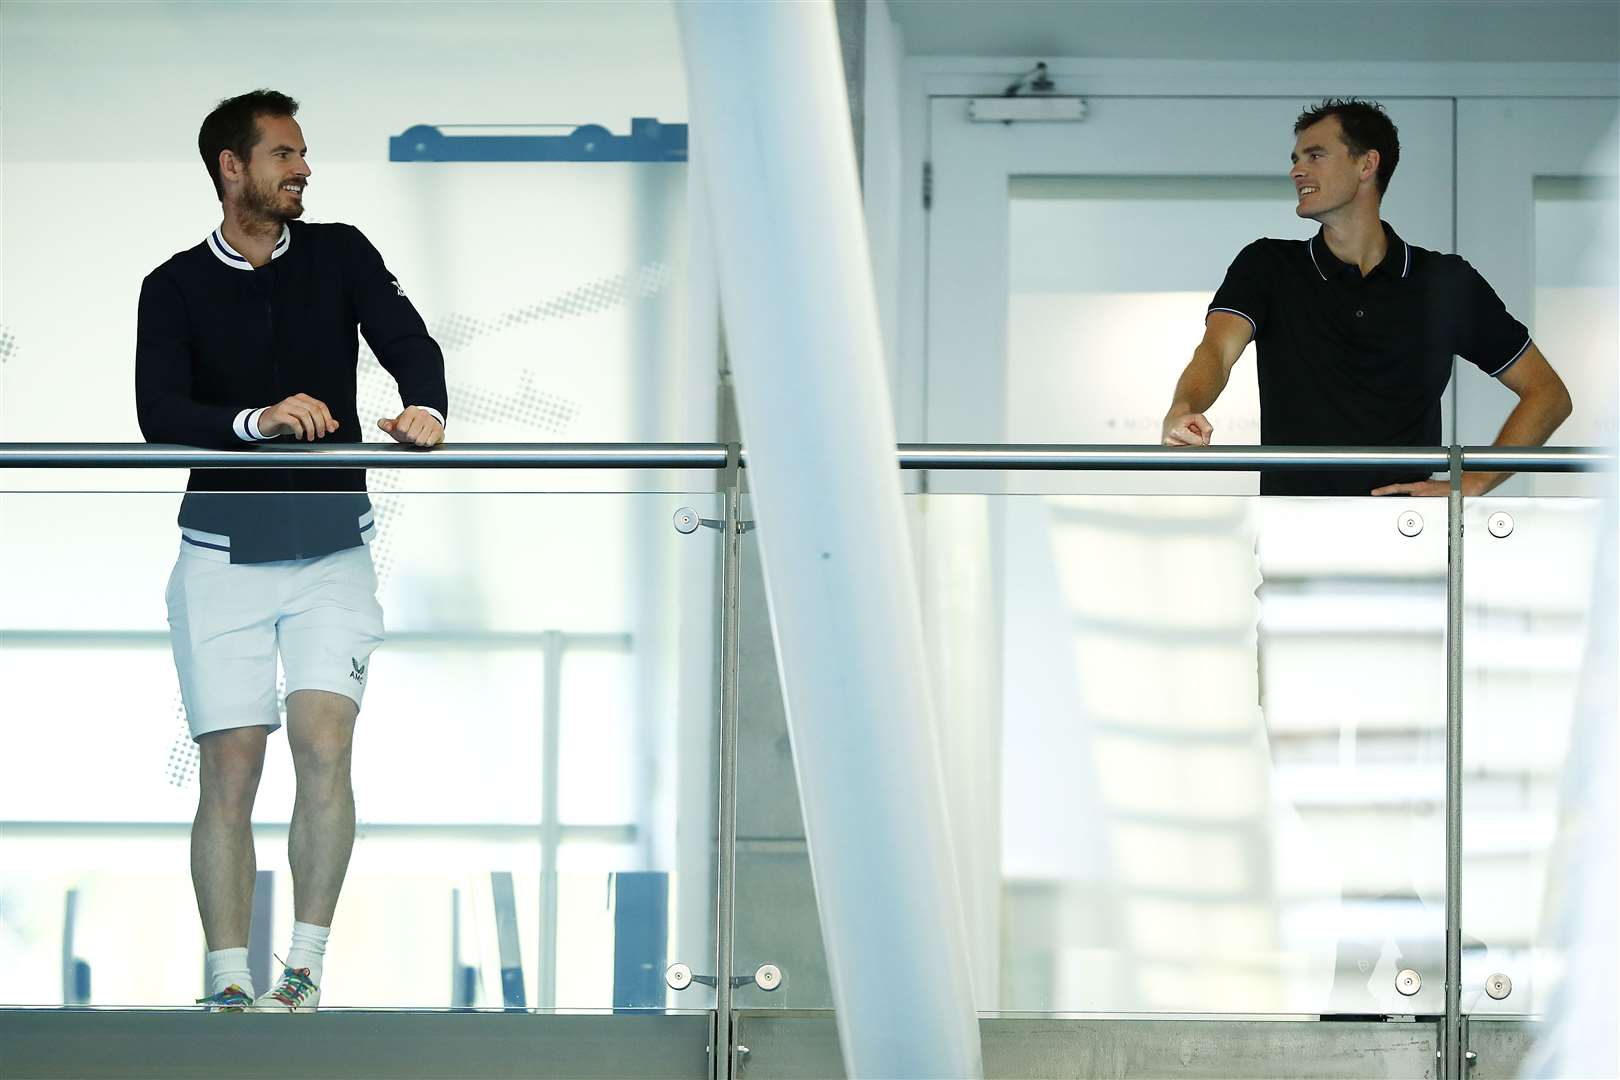 Sir Andy Murray and brother Jamie socially distance as they chat on the player's balcony during practice for the Schroders Battle of the Brits at the National Tennis Centre on June 22, 2020 in London. Photo by Clive Brunskill/Getty Images for Battle Of The Brits.